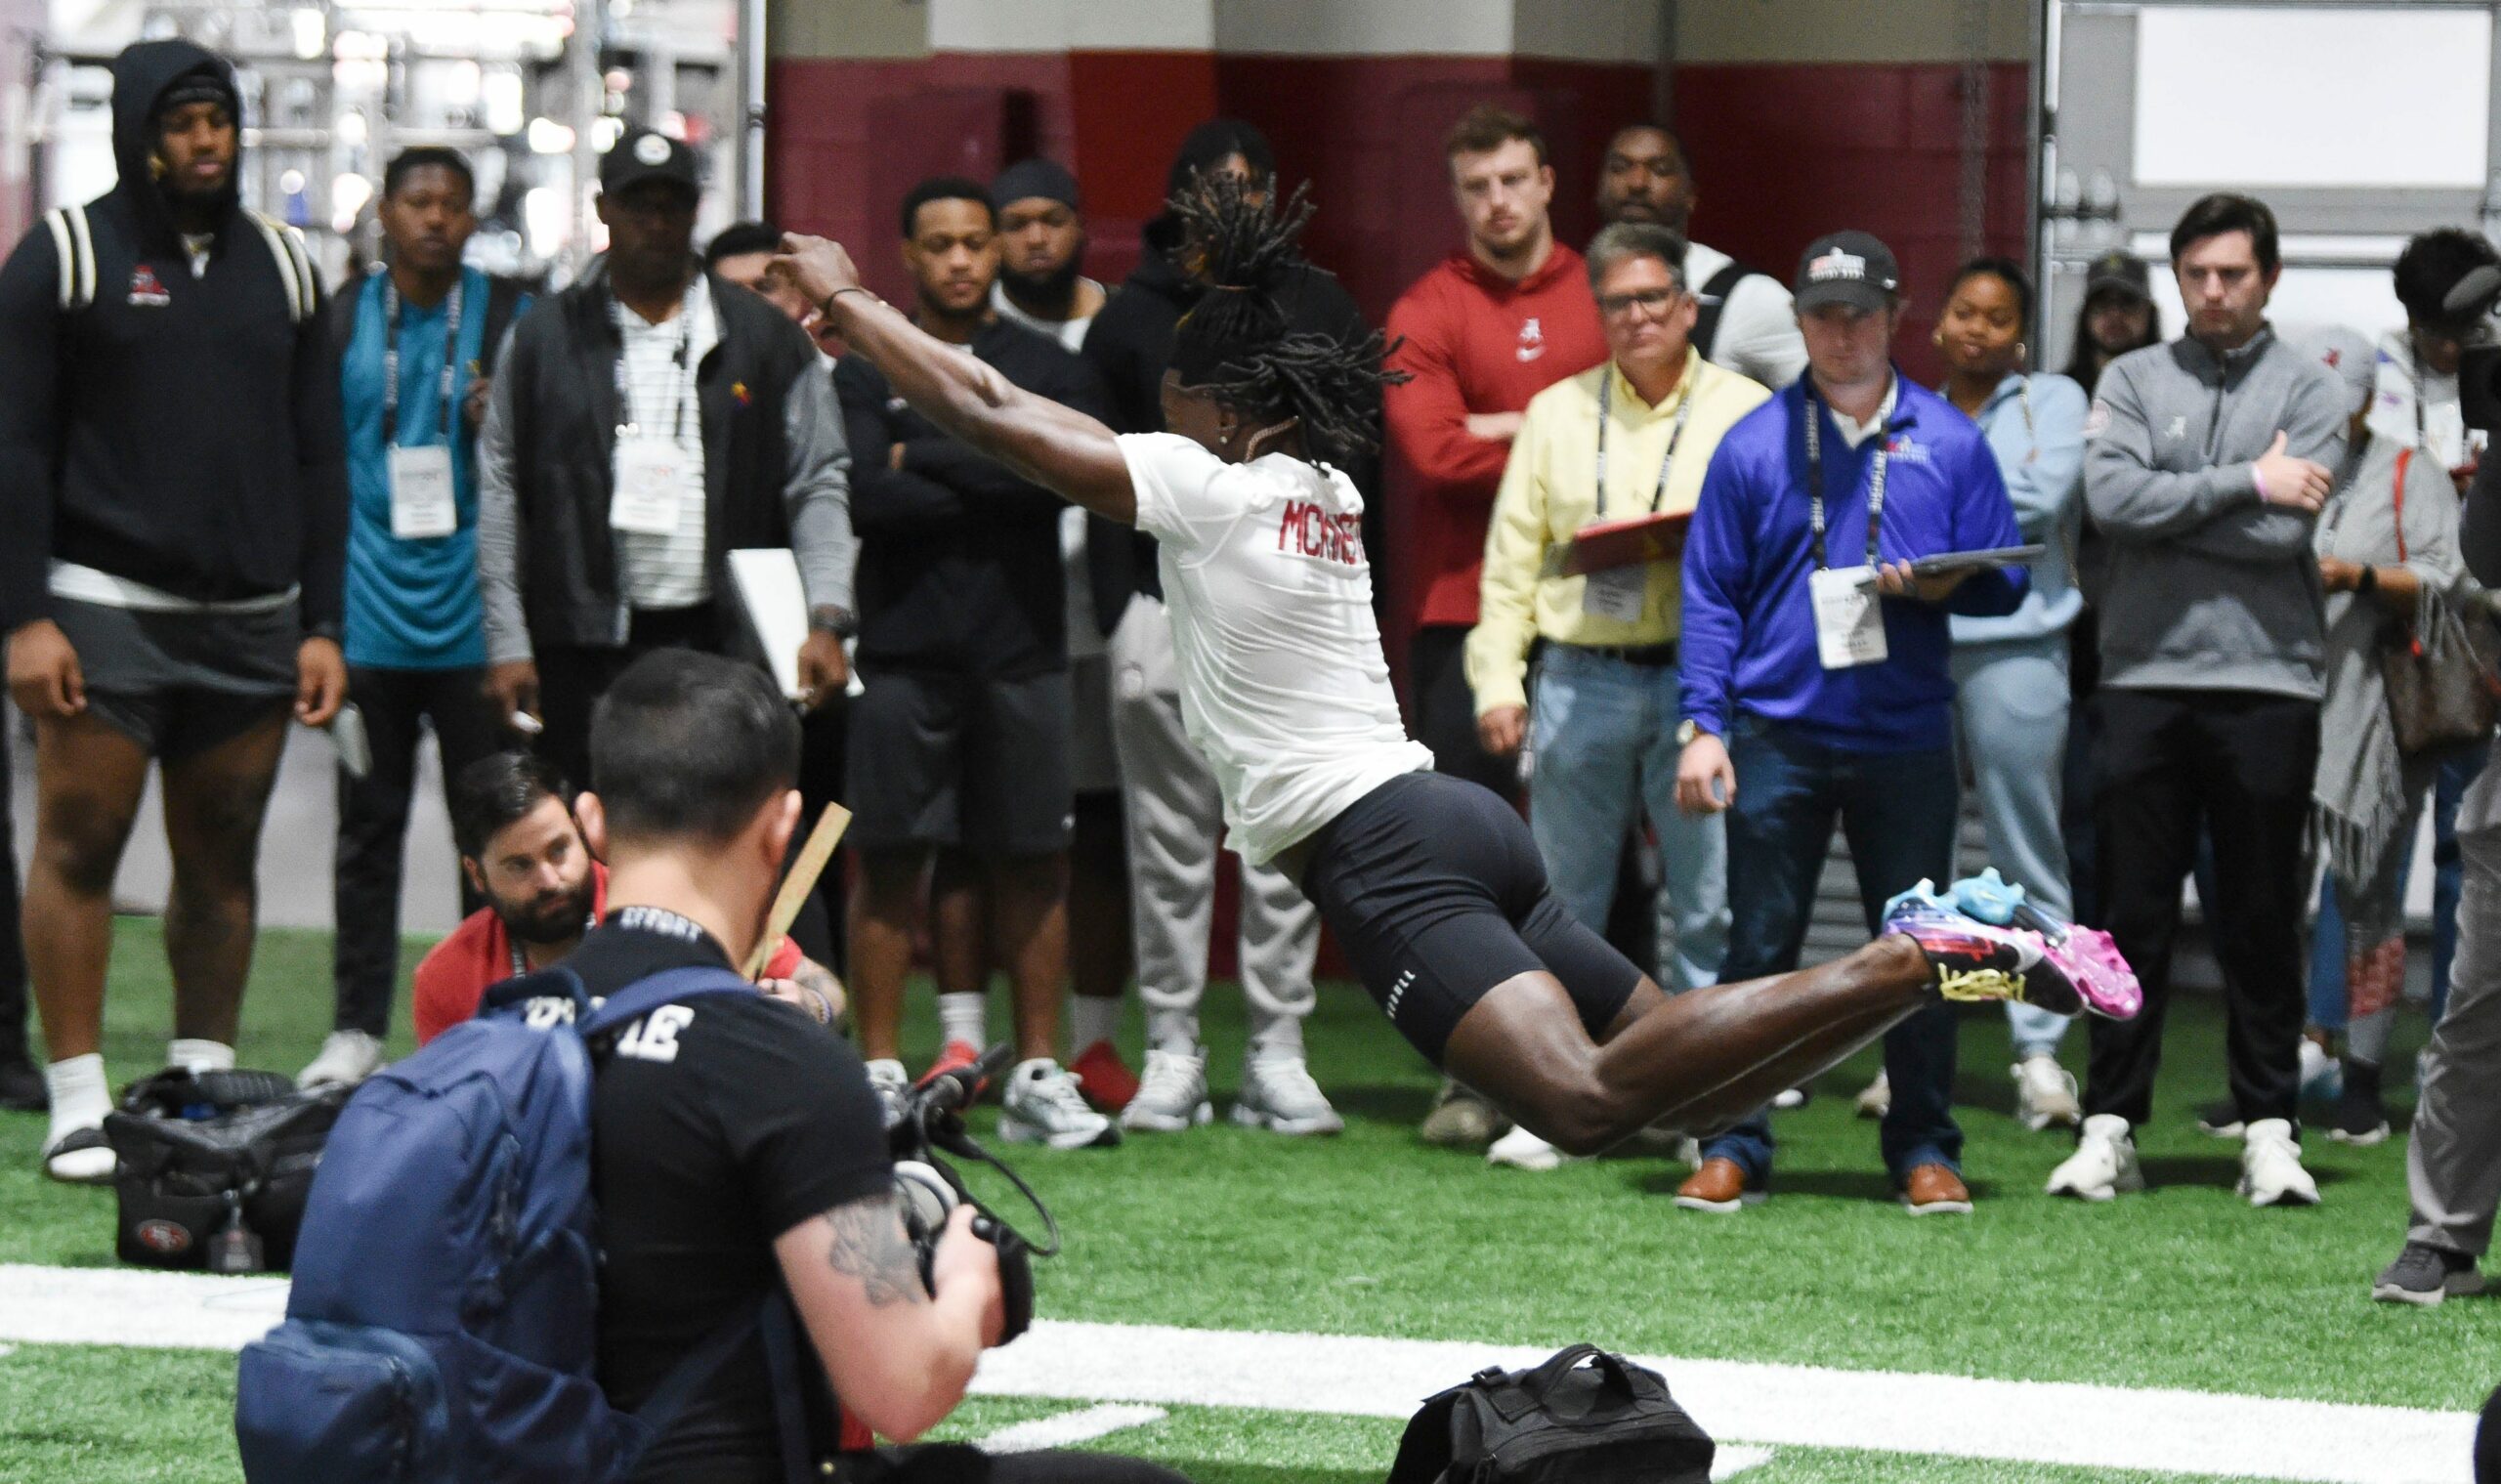 Prospect often linked to Lions performs well at Pro Day in front of Brad Holmes